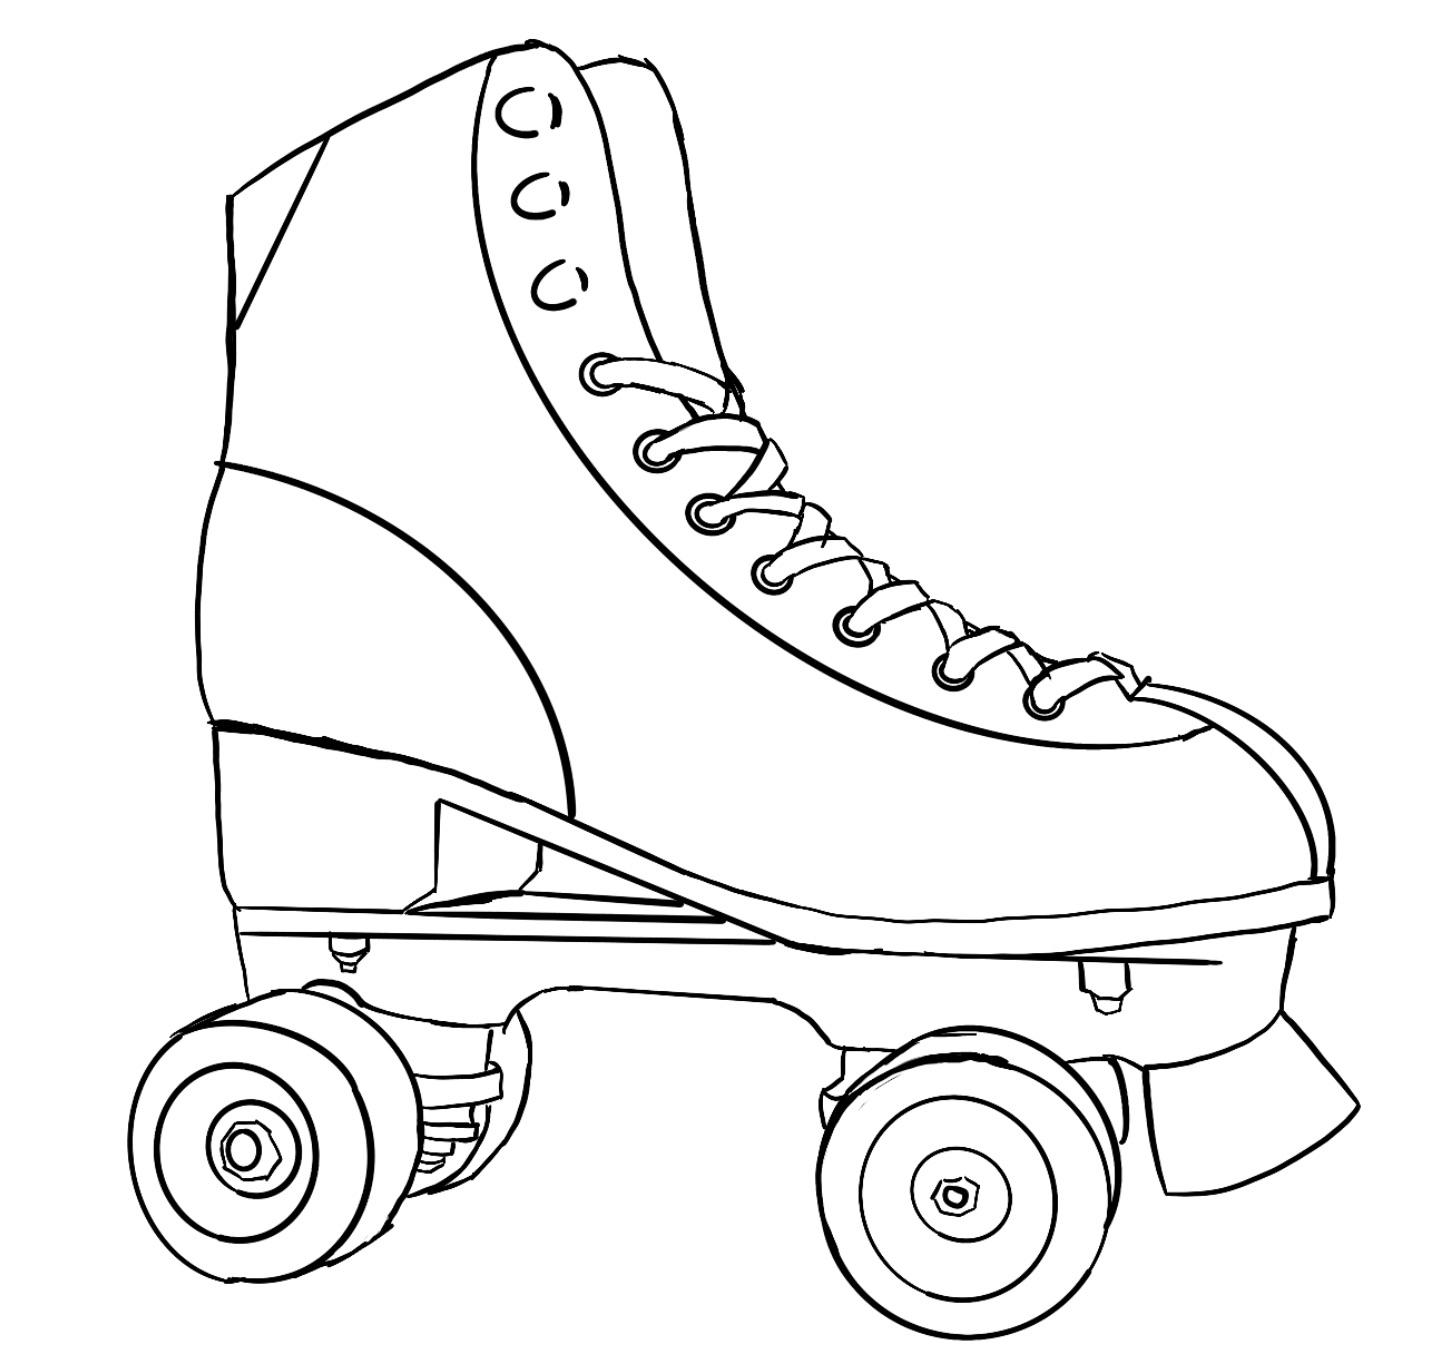 I accidentally made a coloring page while drawing rrollerskating